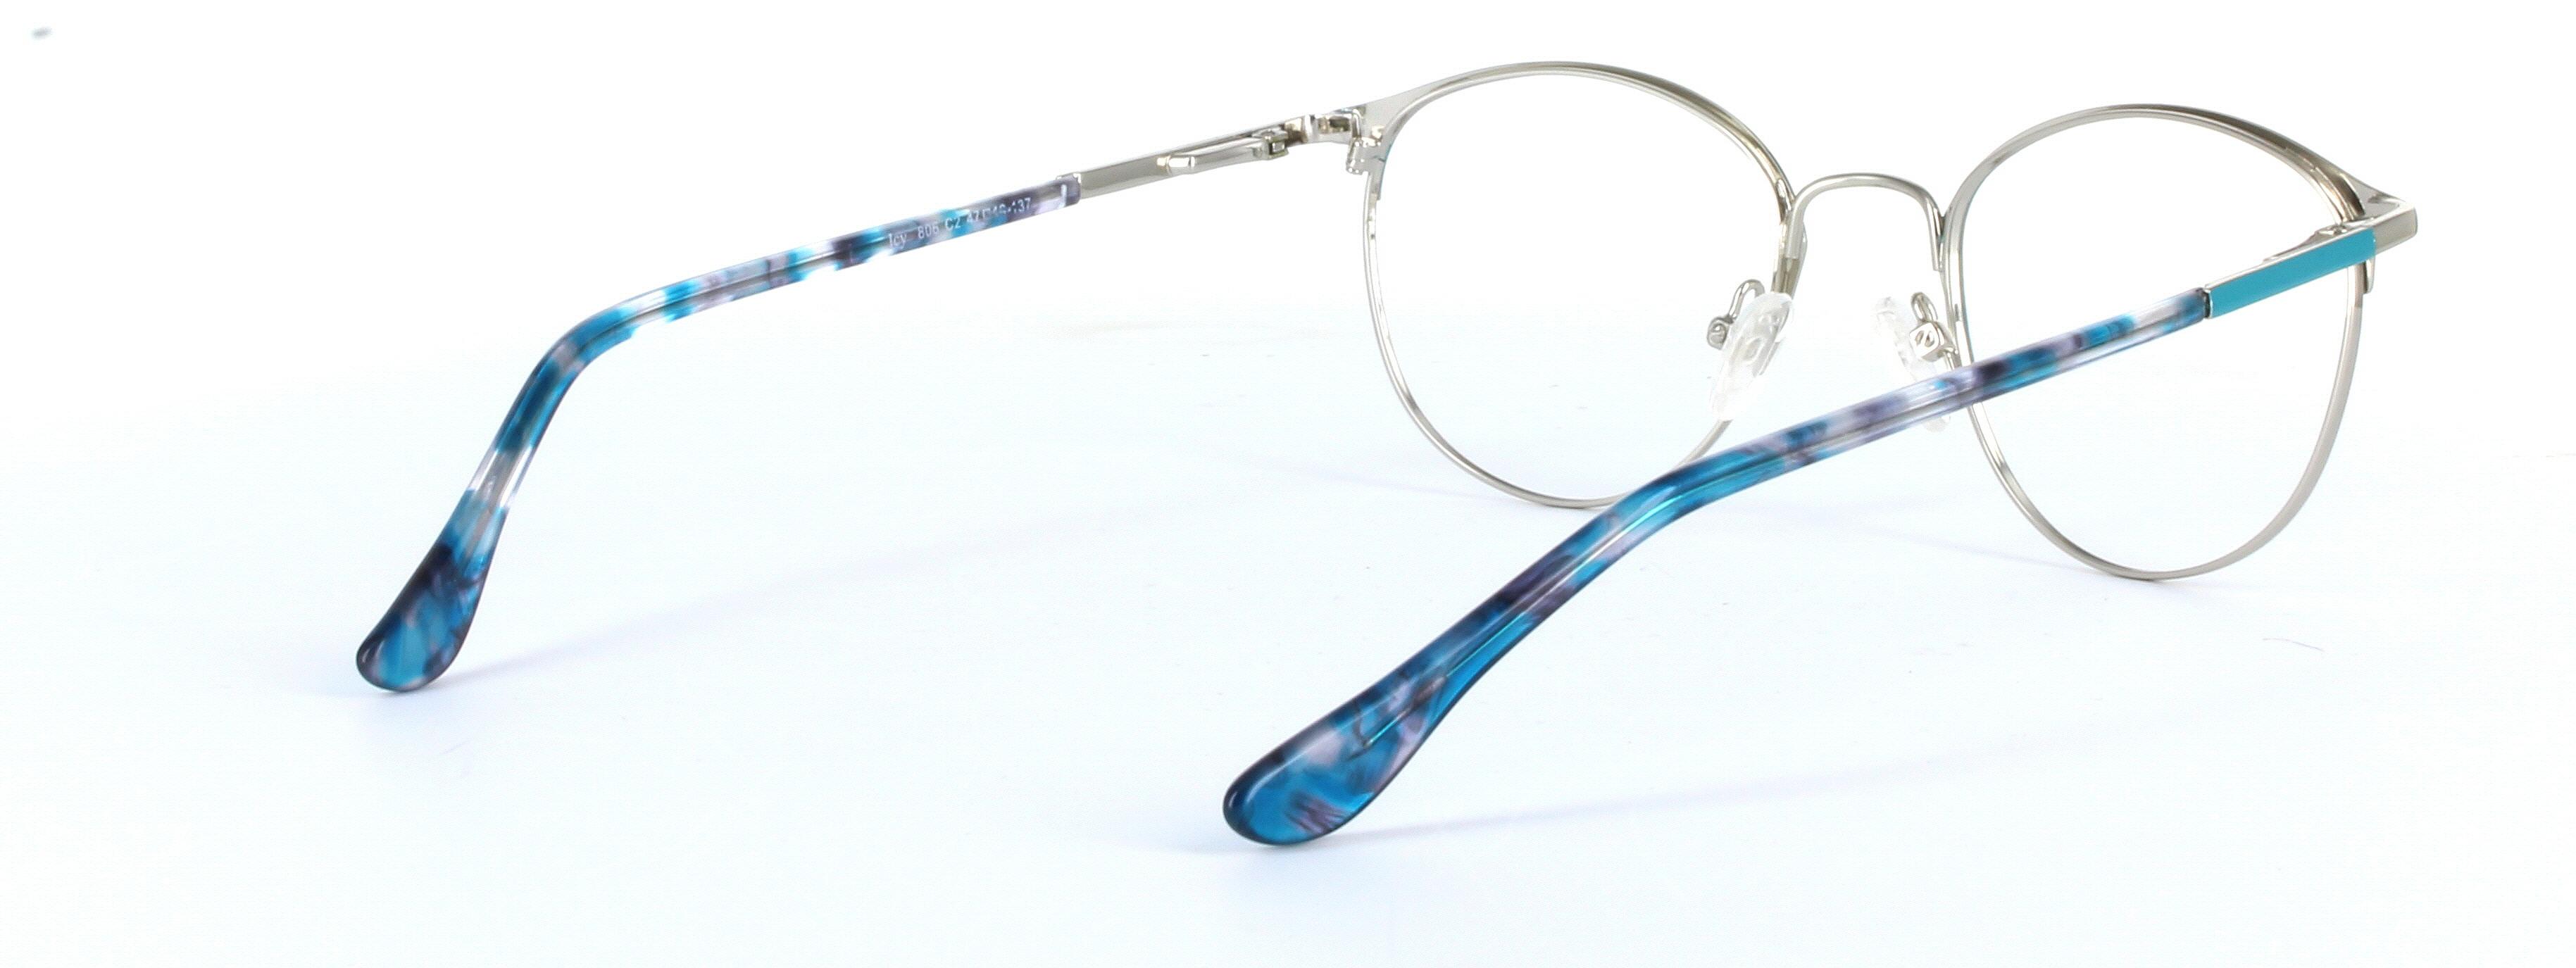 Mia Blue and Silver Full Rim Oval Round Metal Glasses - Image View 4